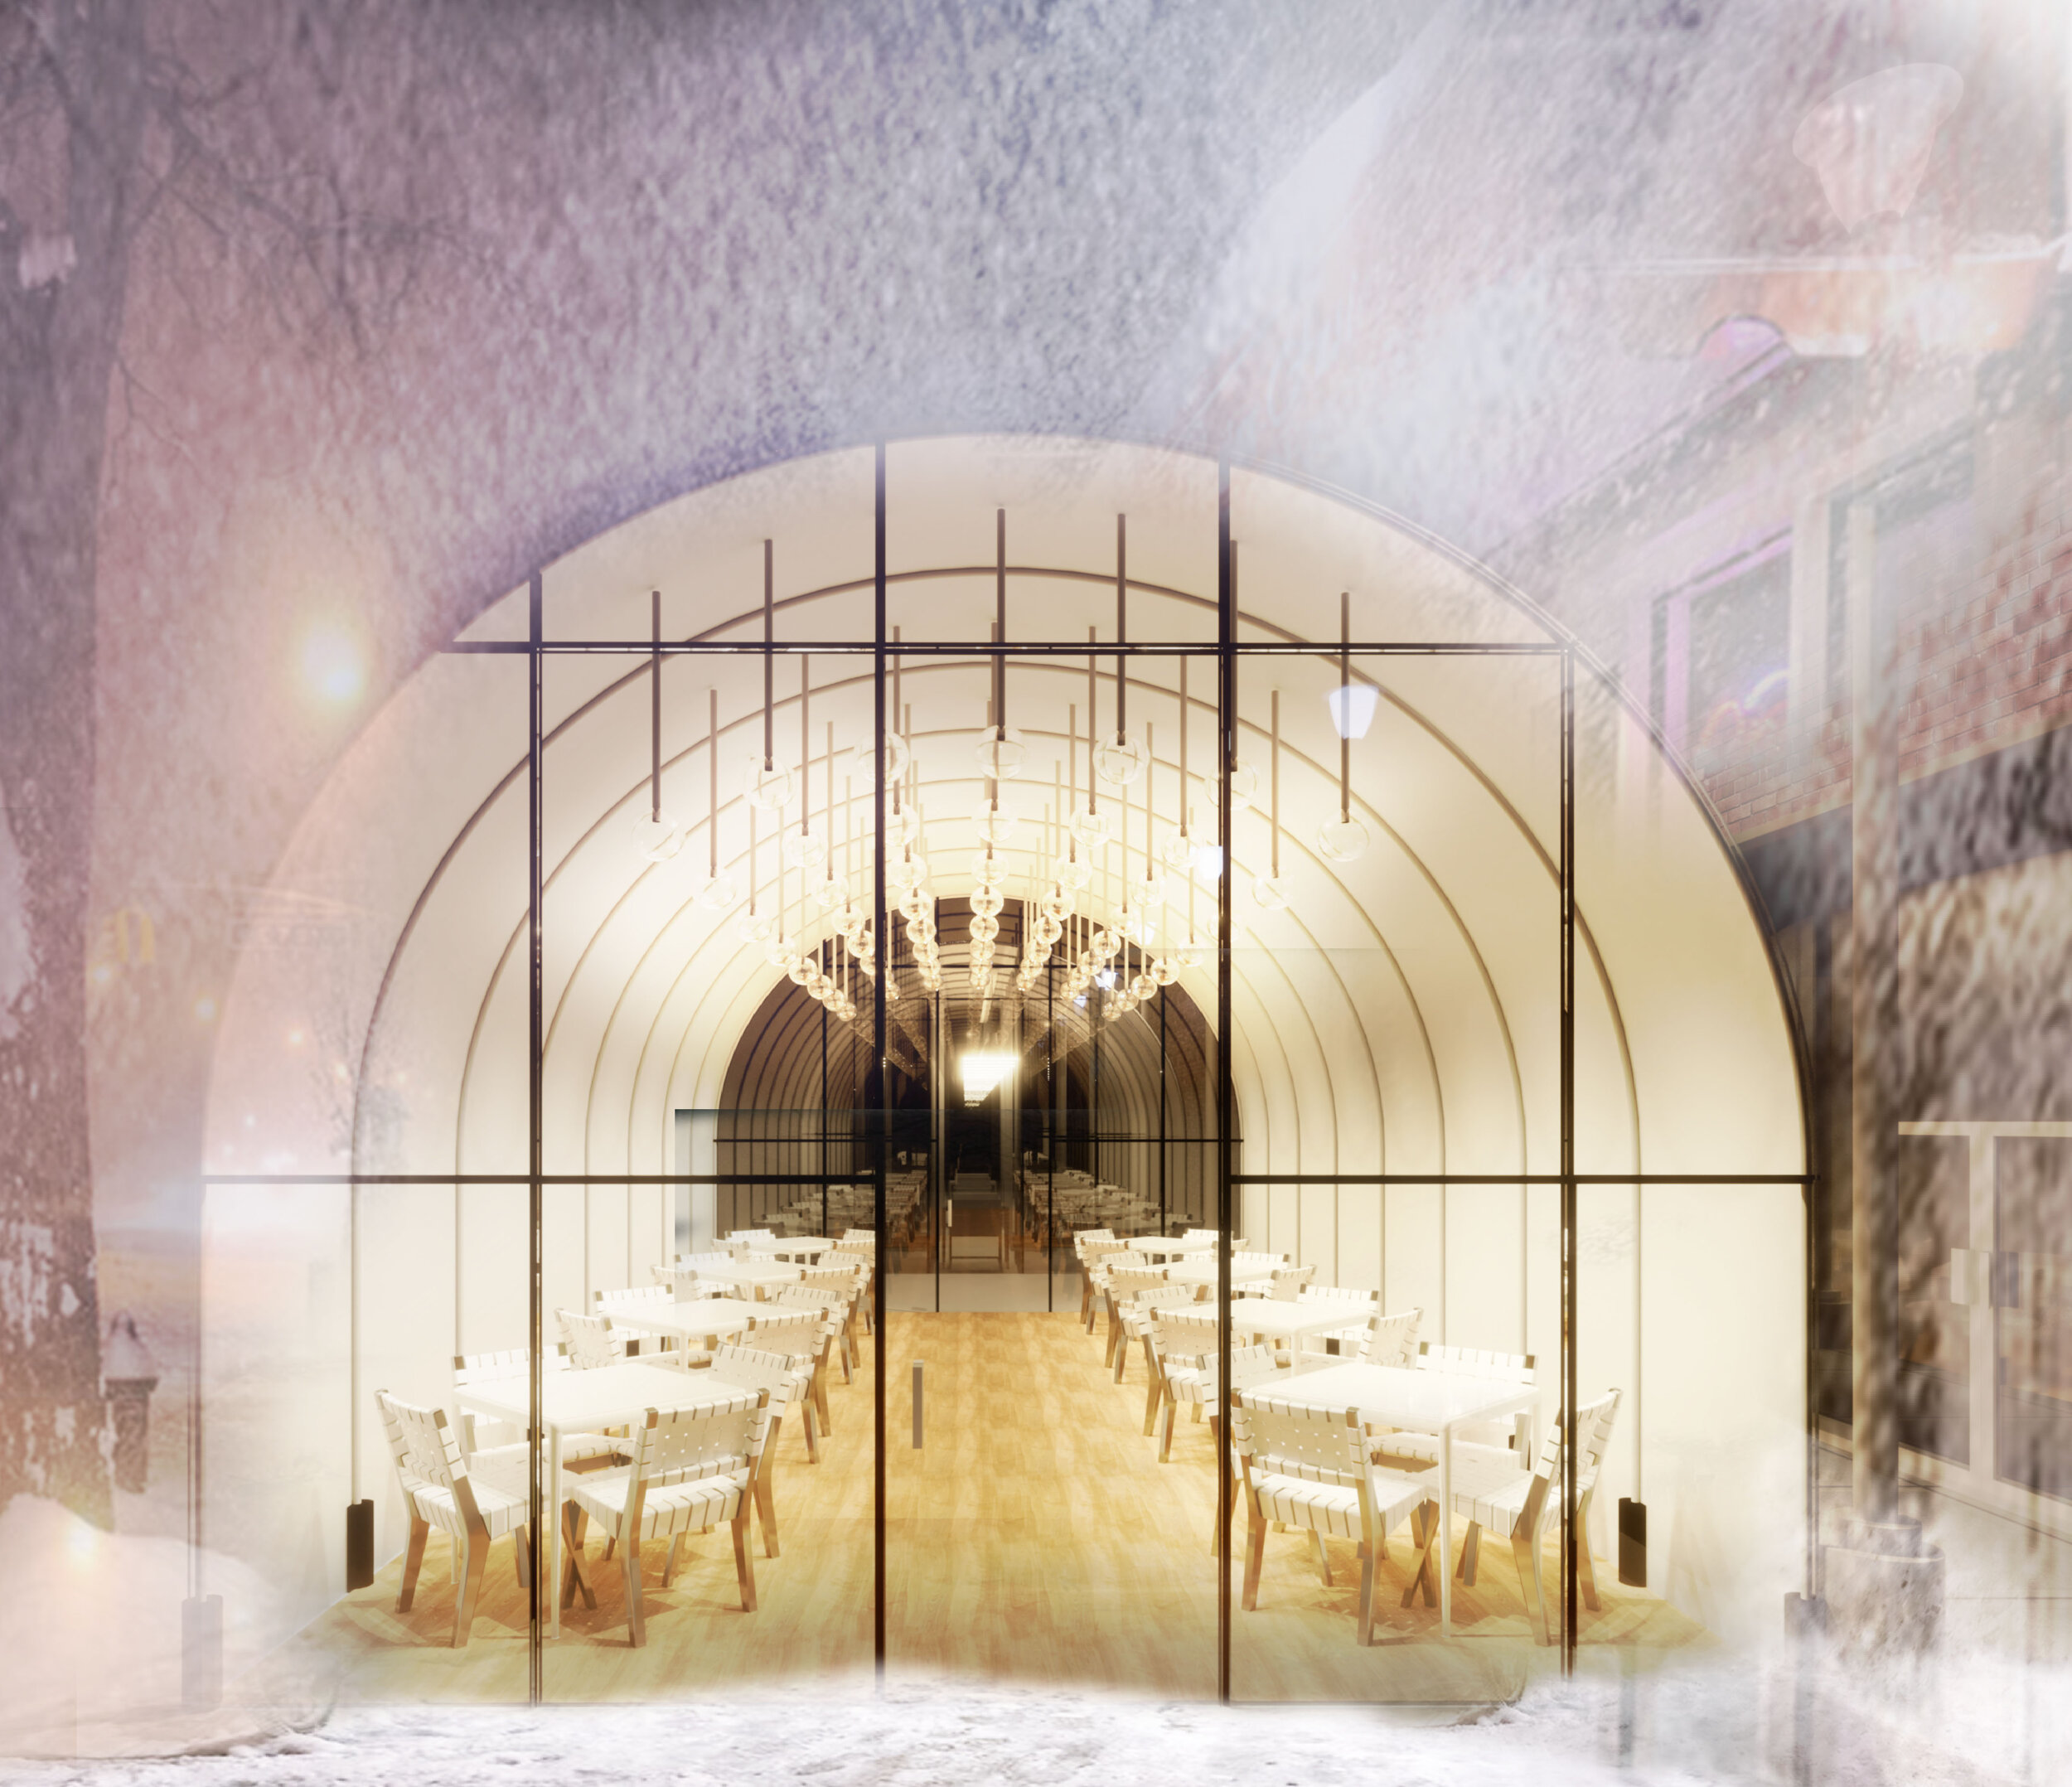 Chicago_Winter_Dining_Proposal.rvt_2020-Sep-05_08-35-34PM-000_3D_View_1_png.jpg